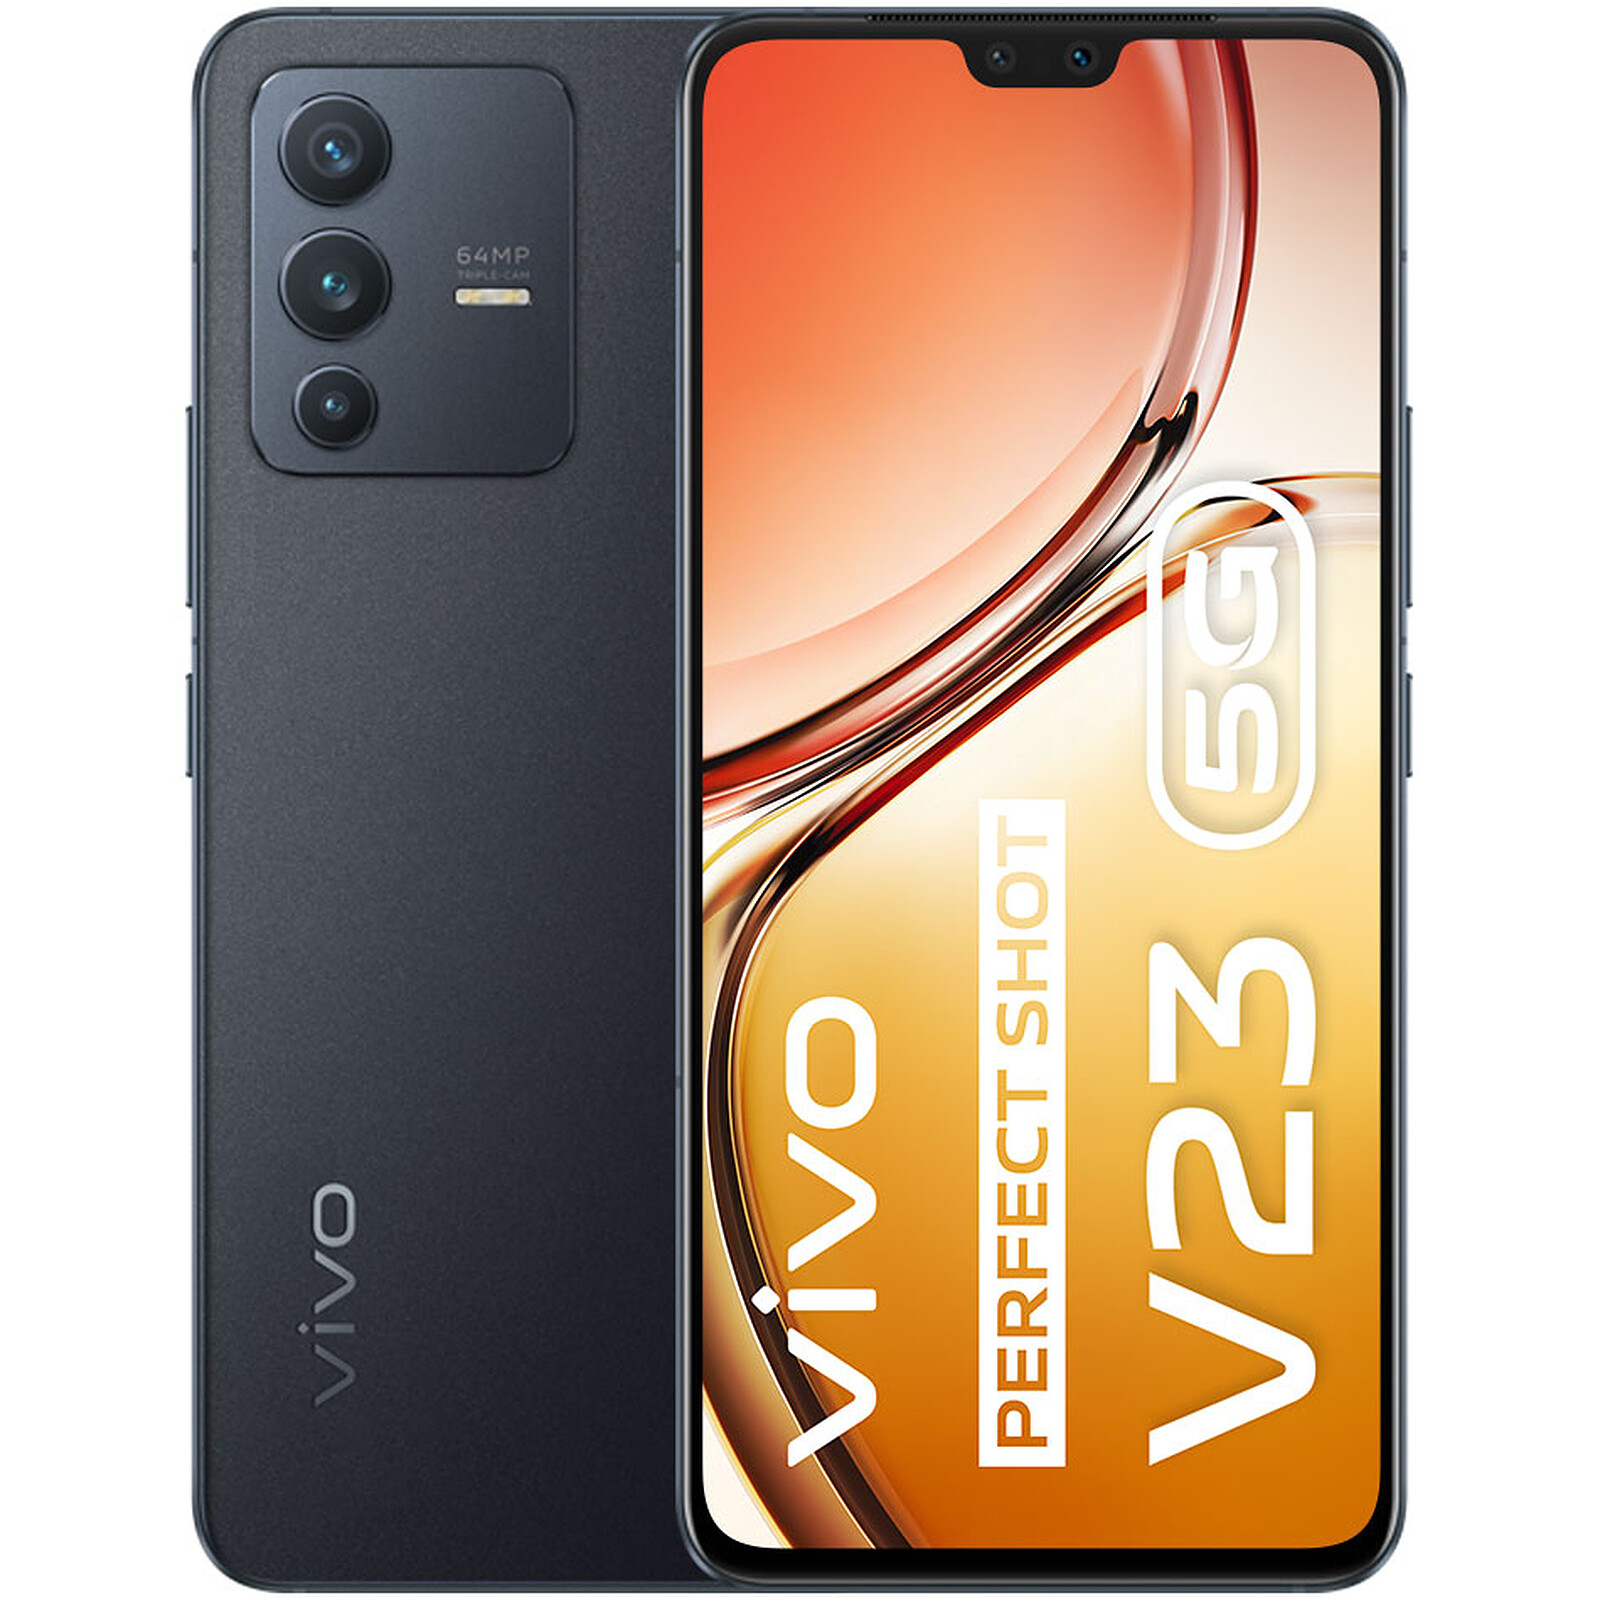 A phone with two front flashlights? (Vivo V23 Pro Review & Camera